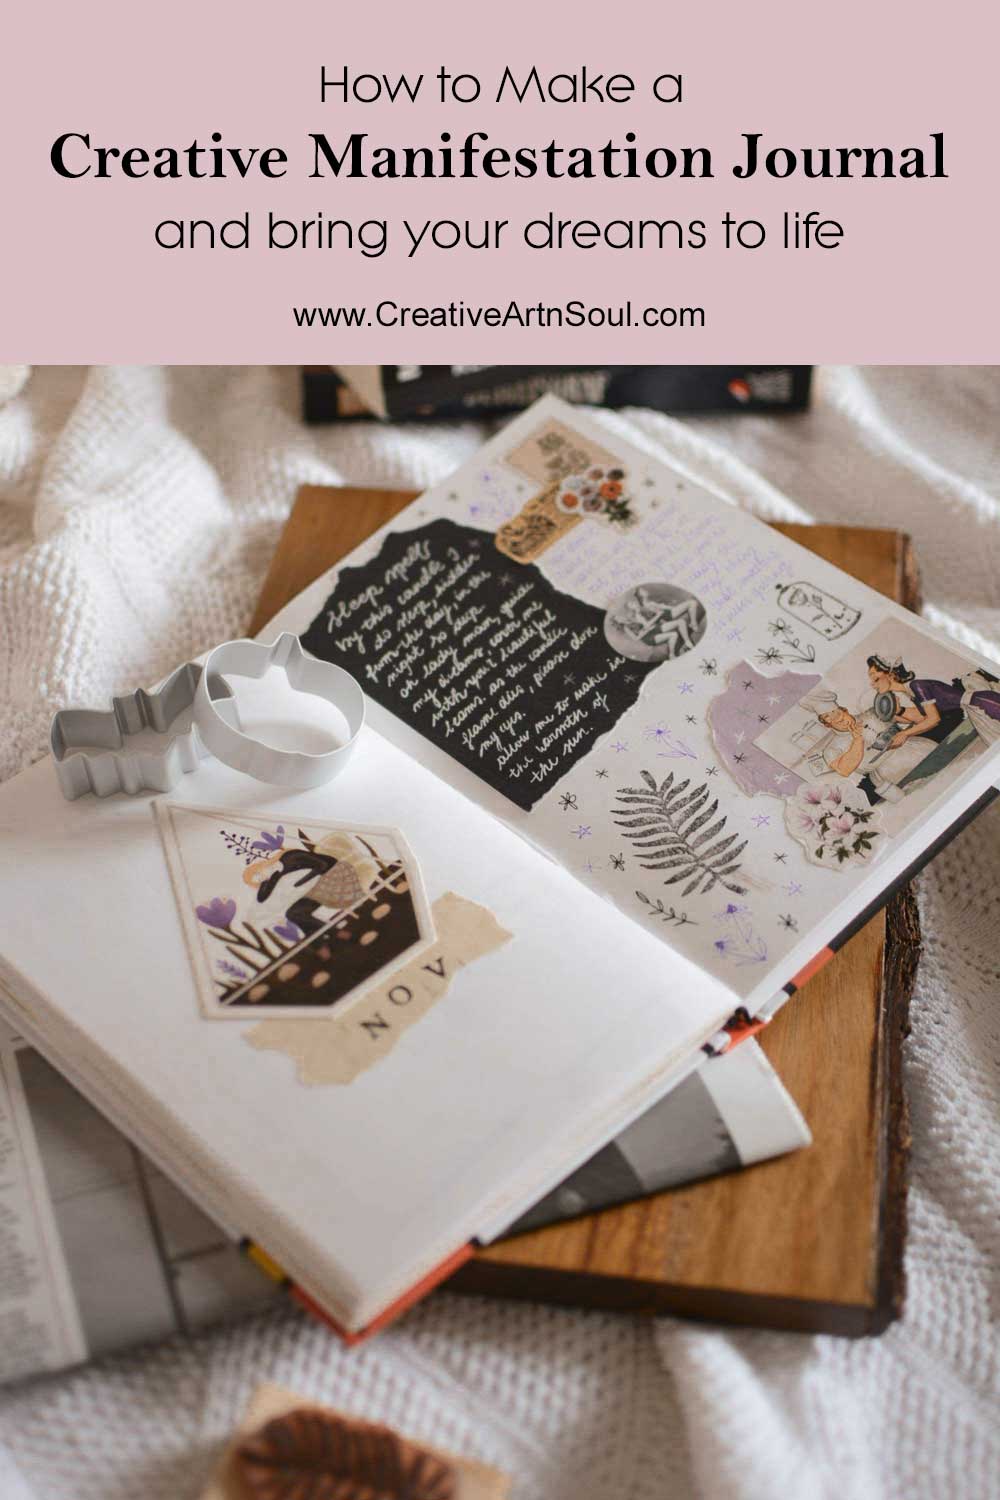 How to Make a Creative Manifestation Journal and Bring Your Dreams to Life